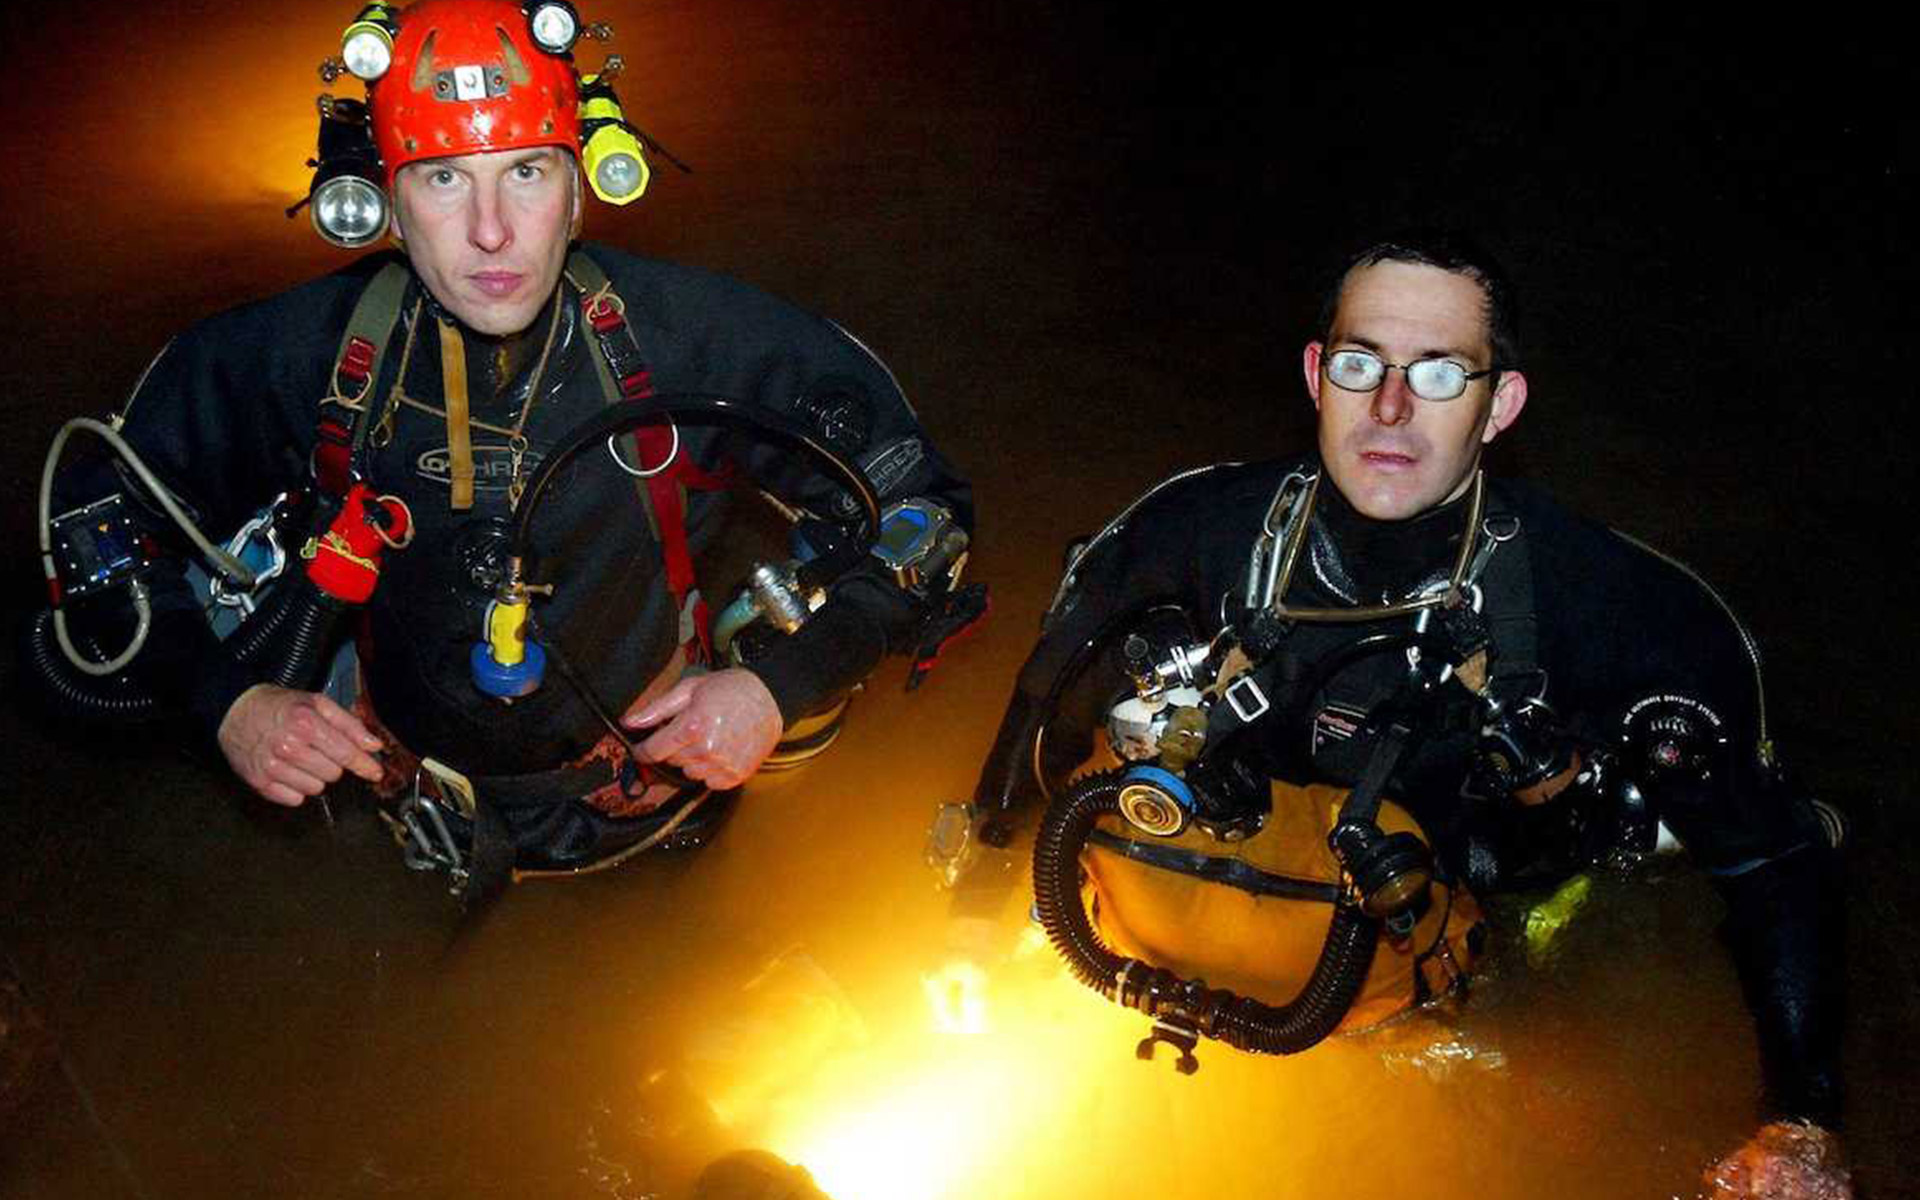 Outstanding Bravery - British Cave Rescue team